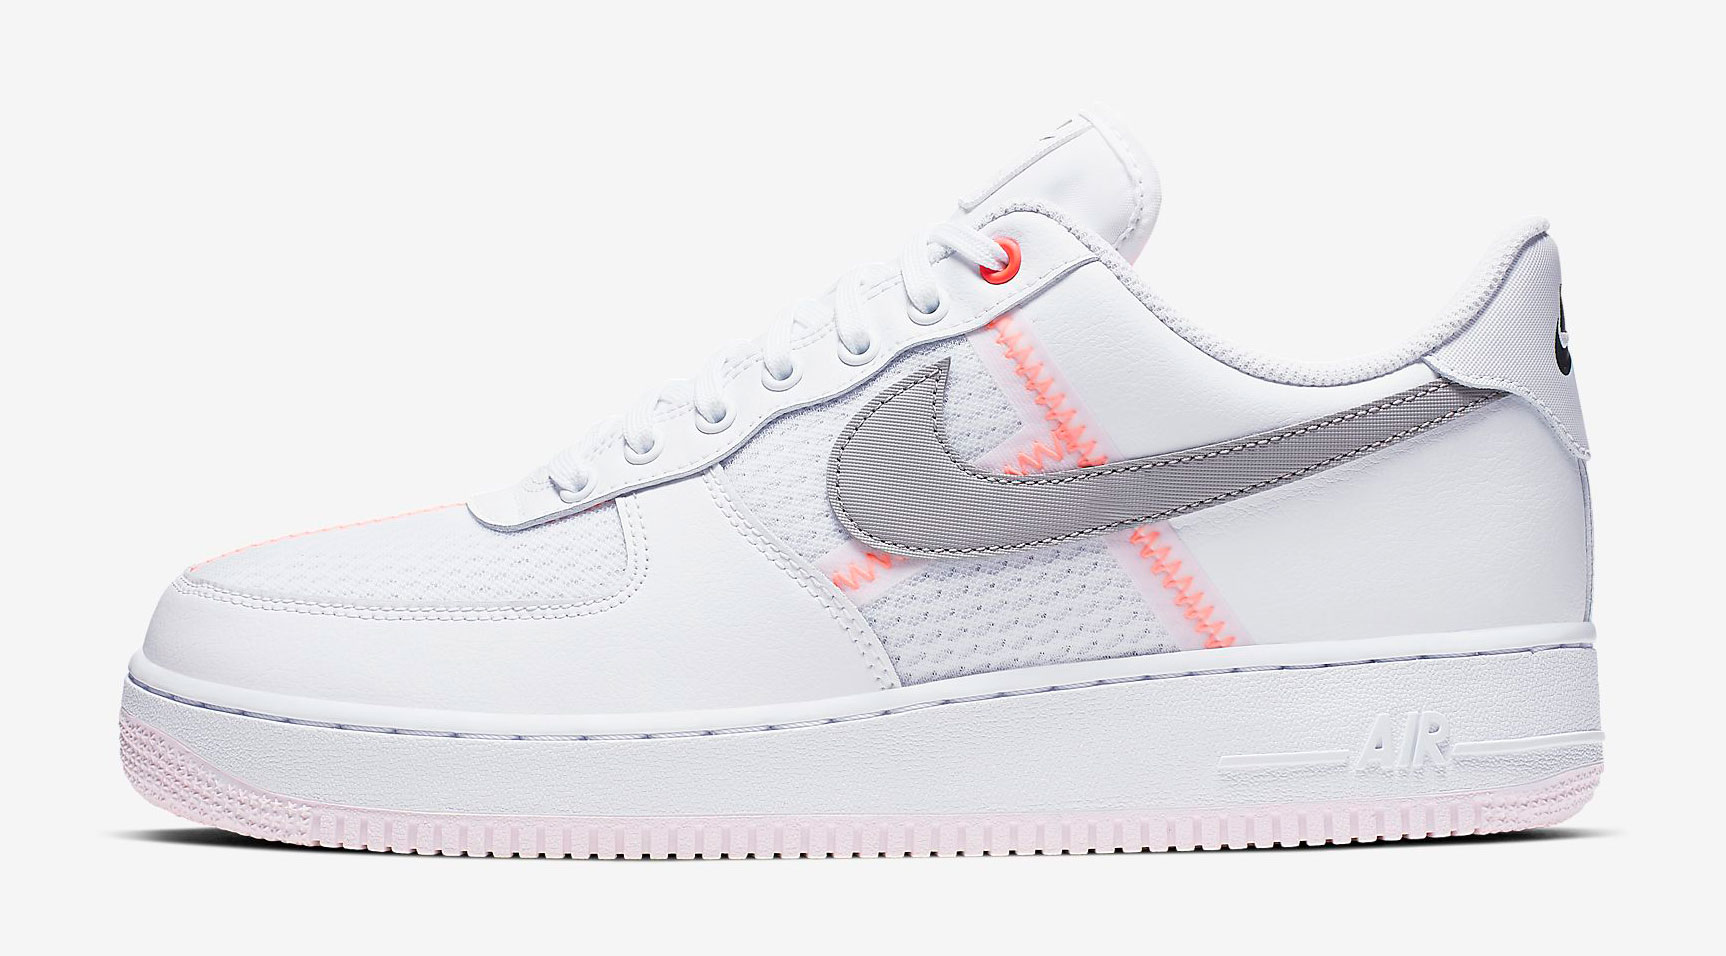 nike-air-force-1-white-off-noir-crimson-release-date-july-1